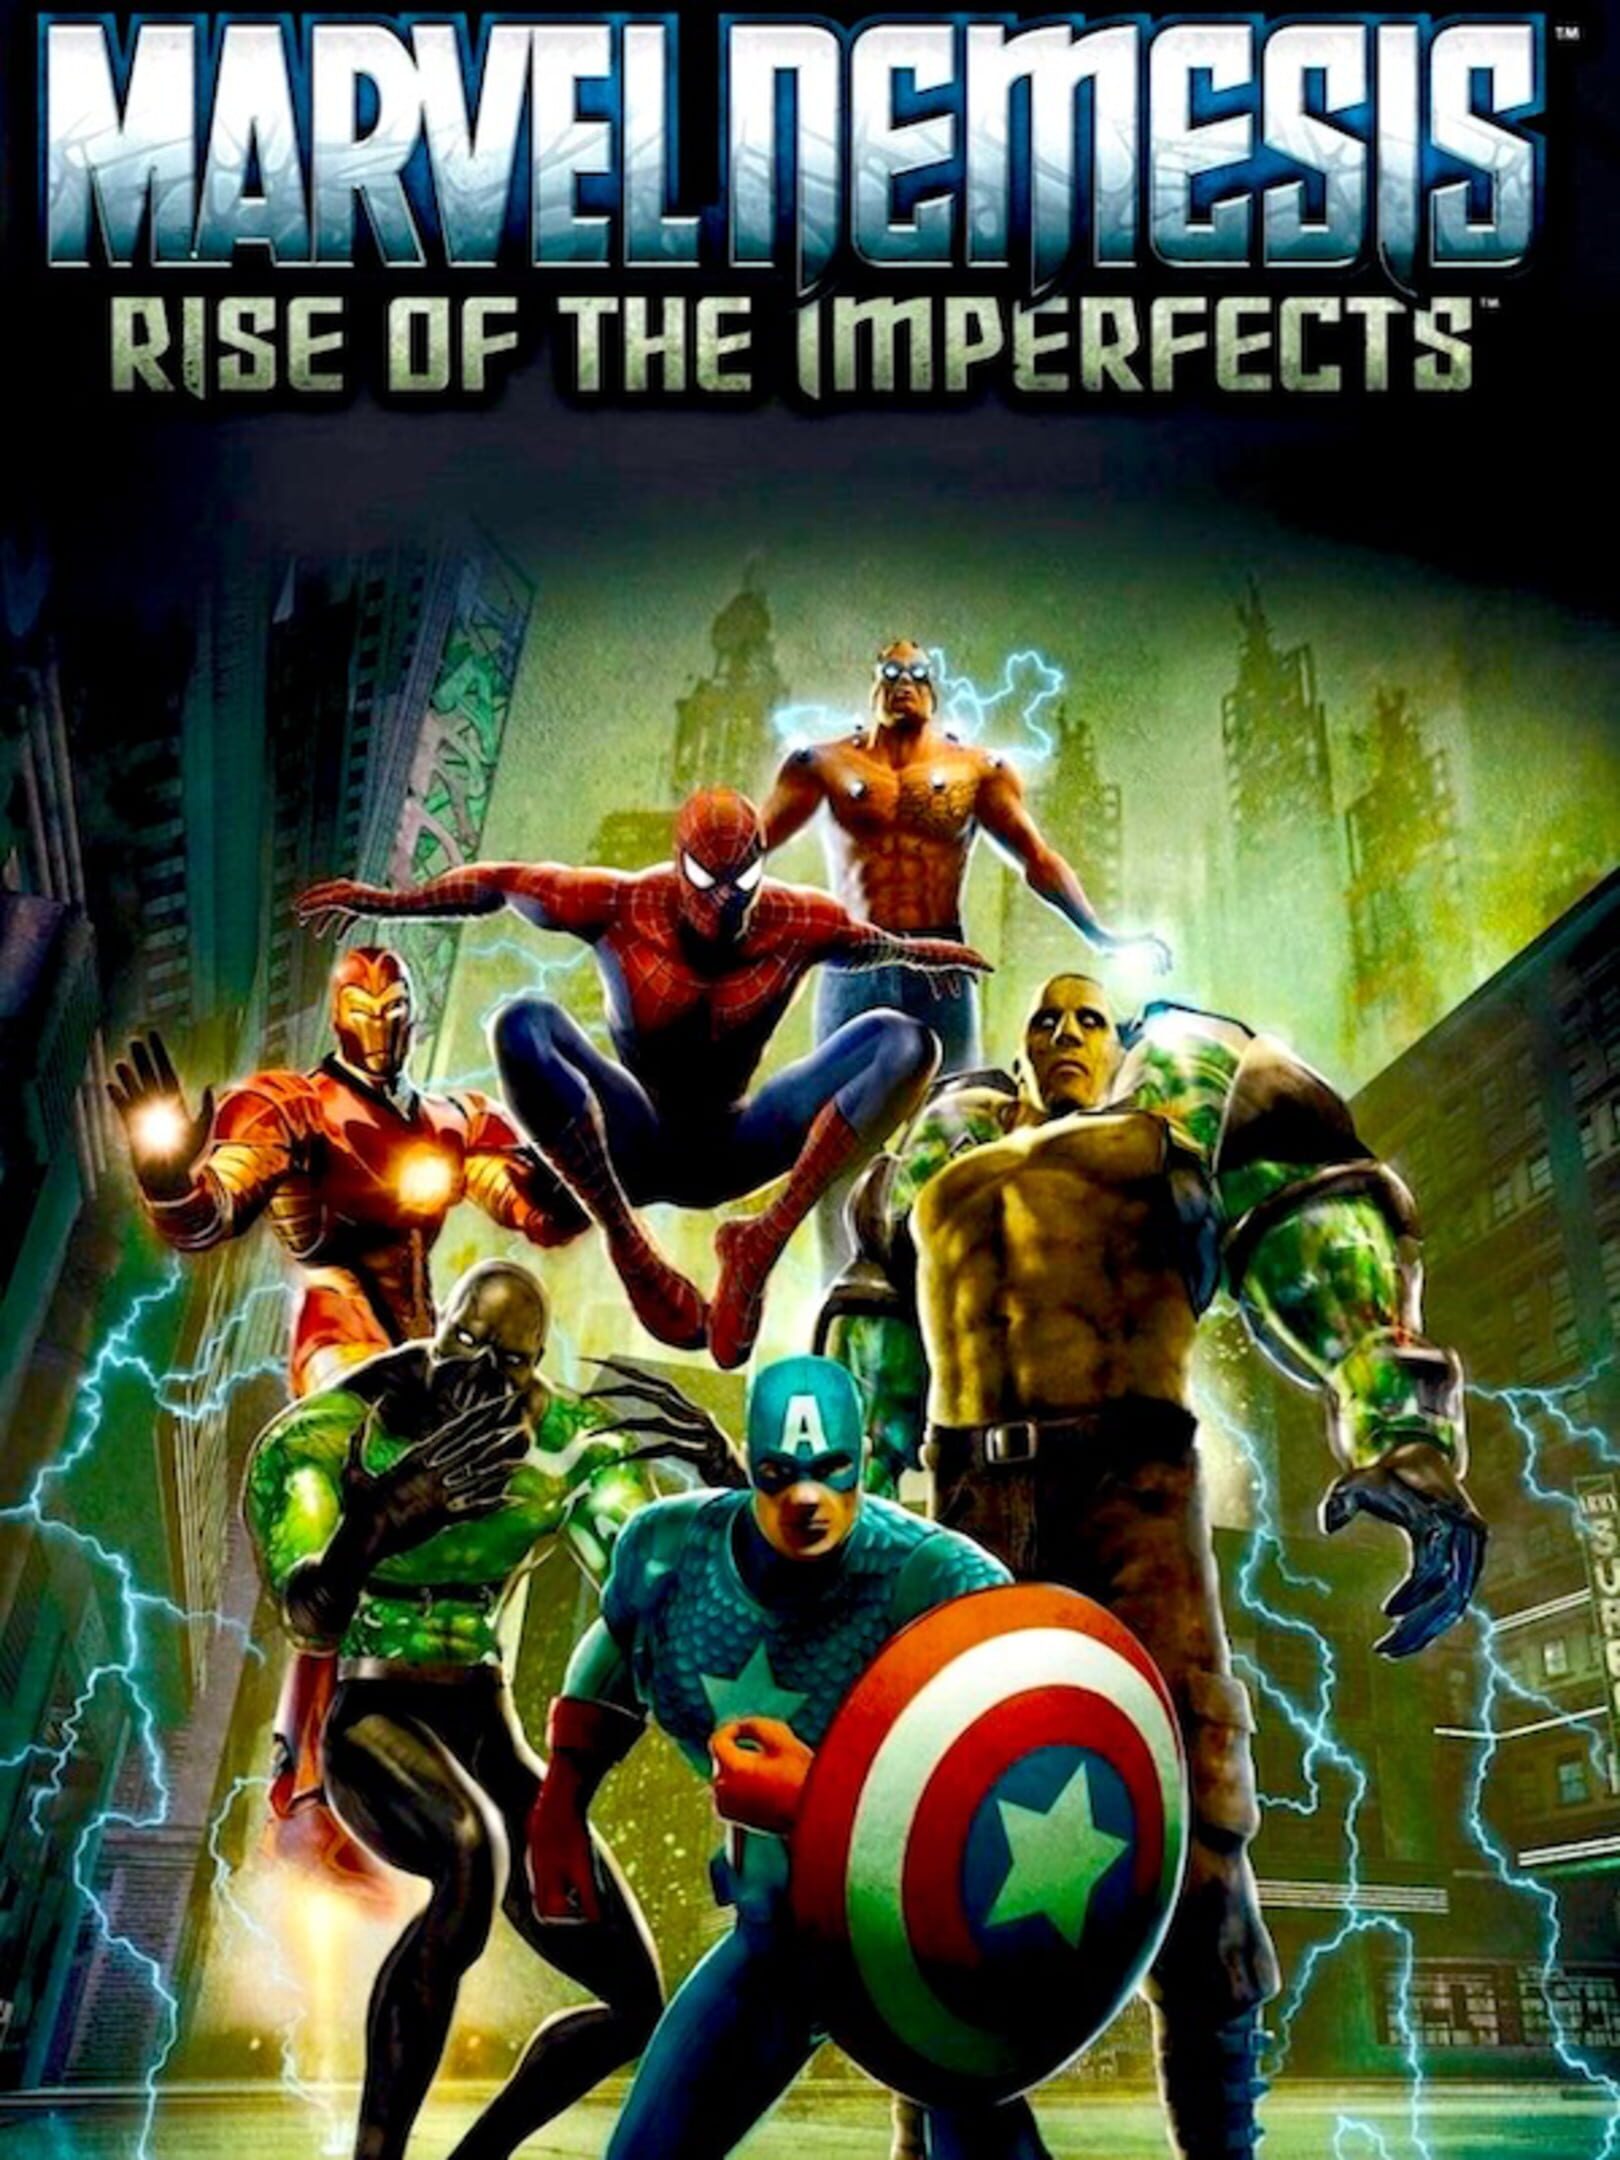 Marvel Nemesis: Rise of the Imperfects News, Guides, Walkthrough, Screenshots, and Reviews